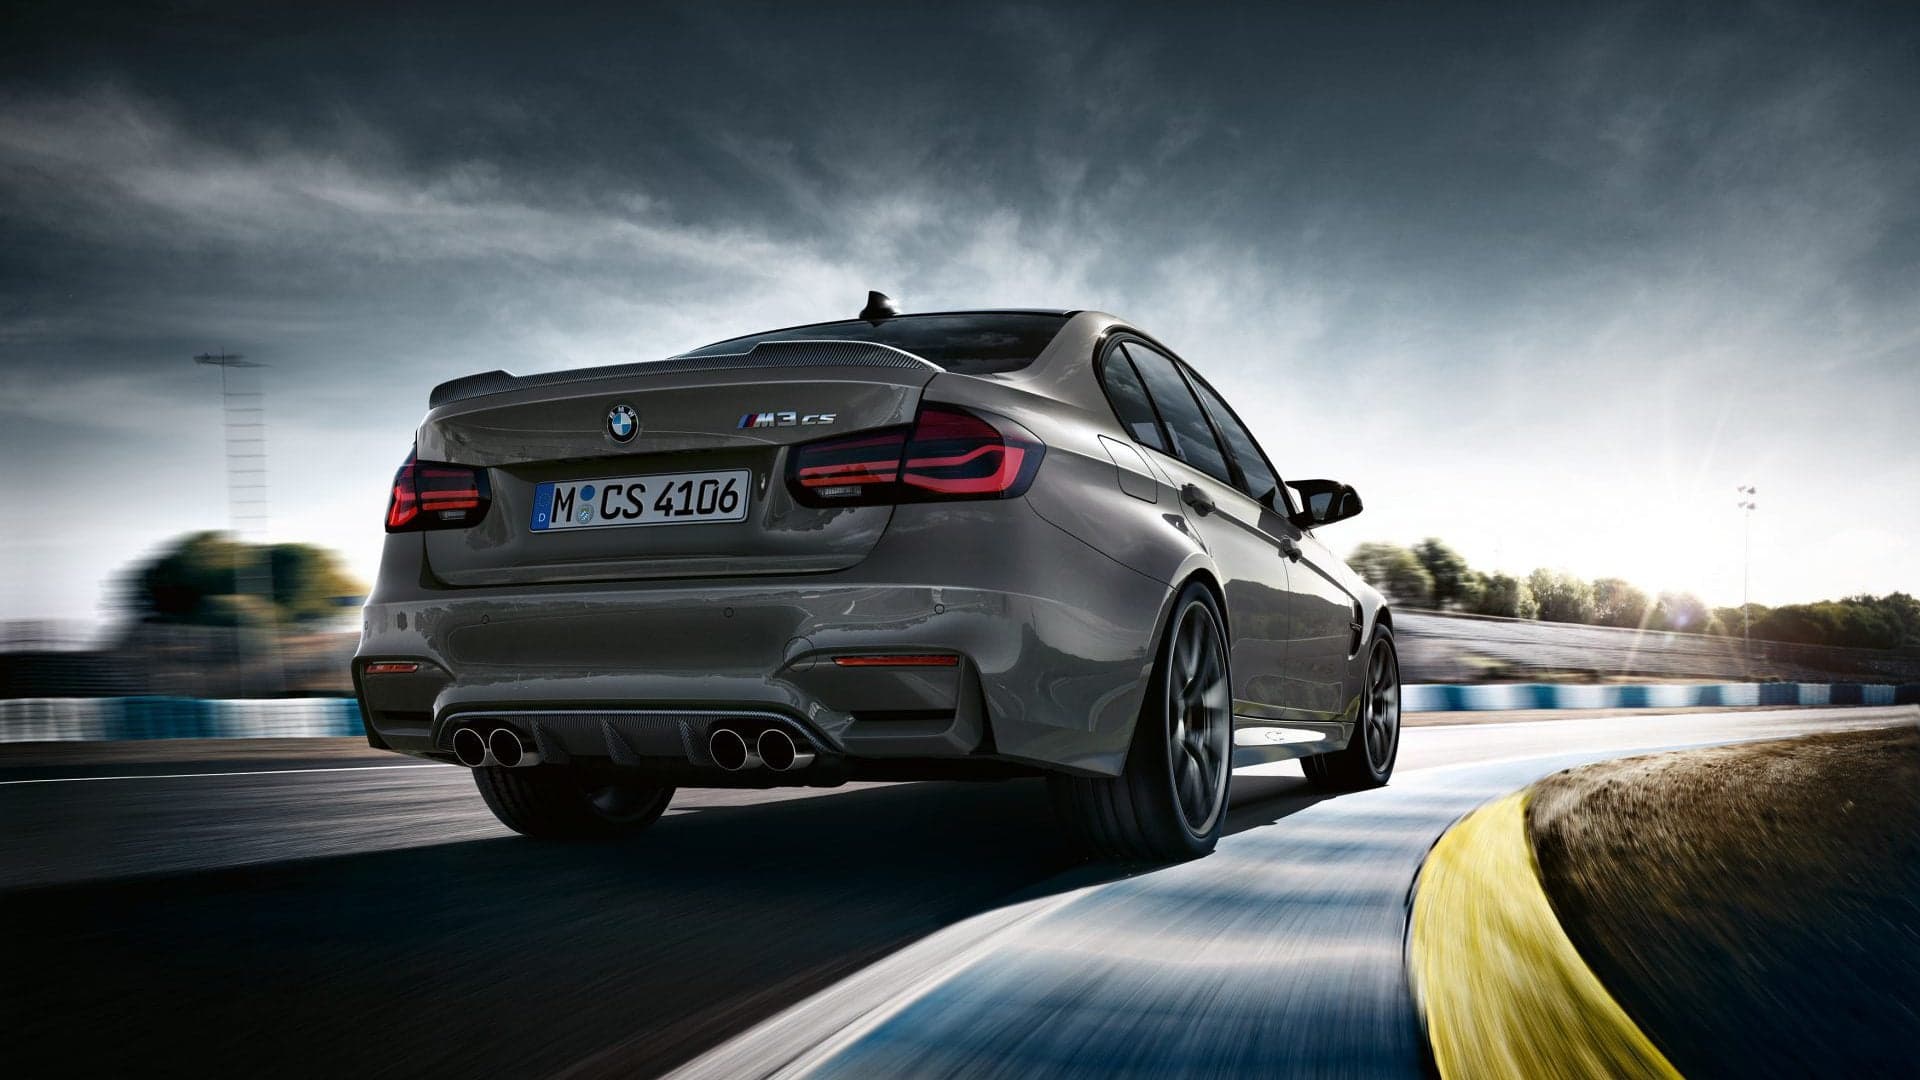 BMW M3 CS Revealed as the Most Powerful M3 to Date